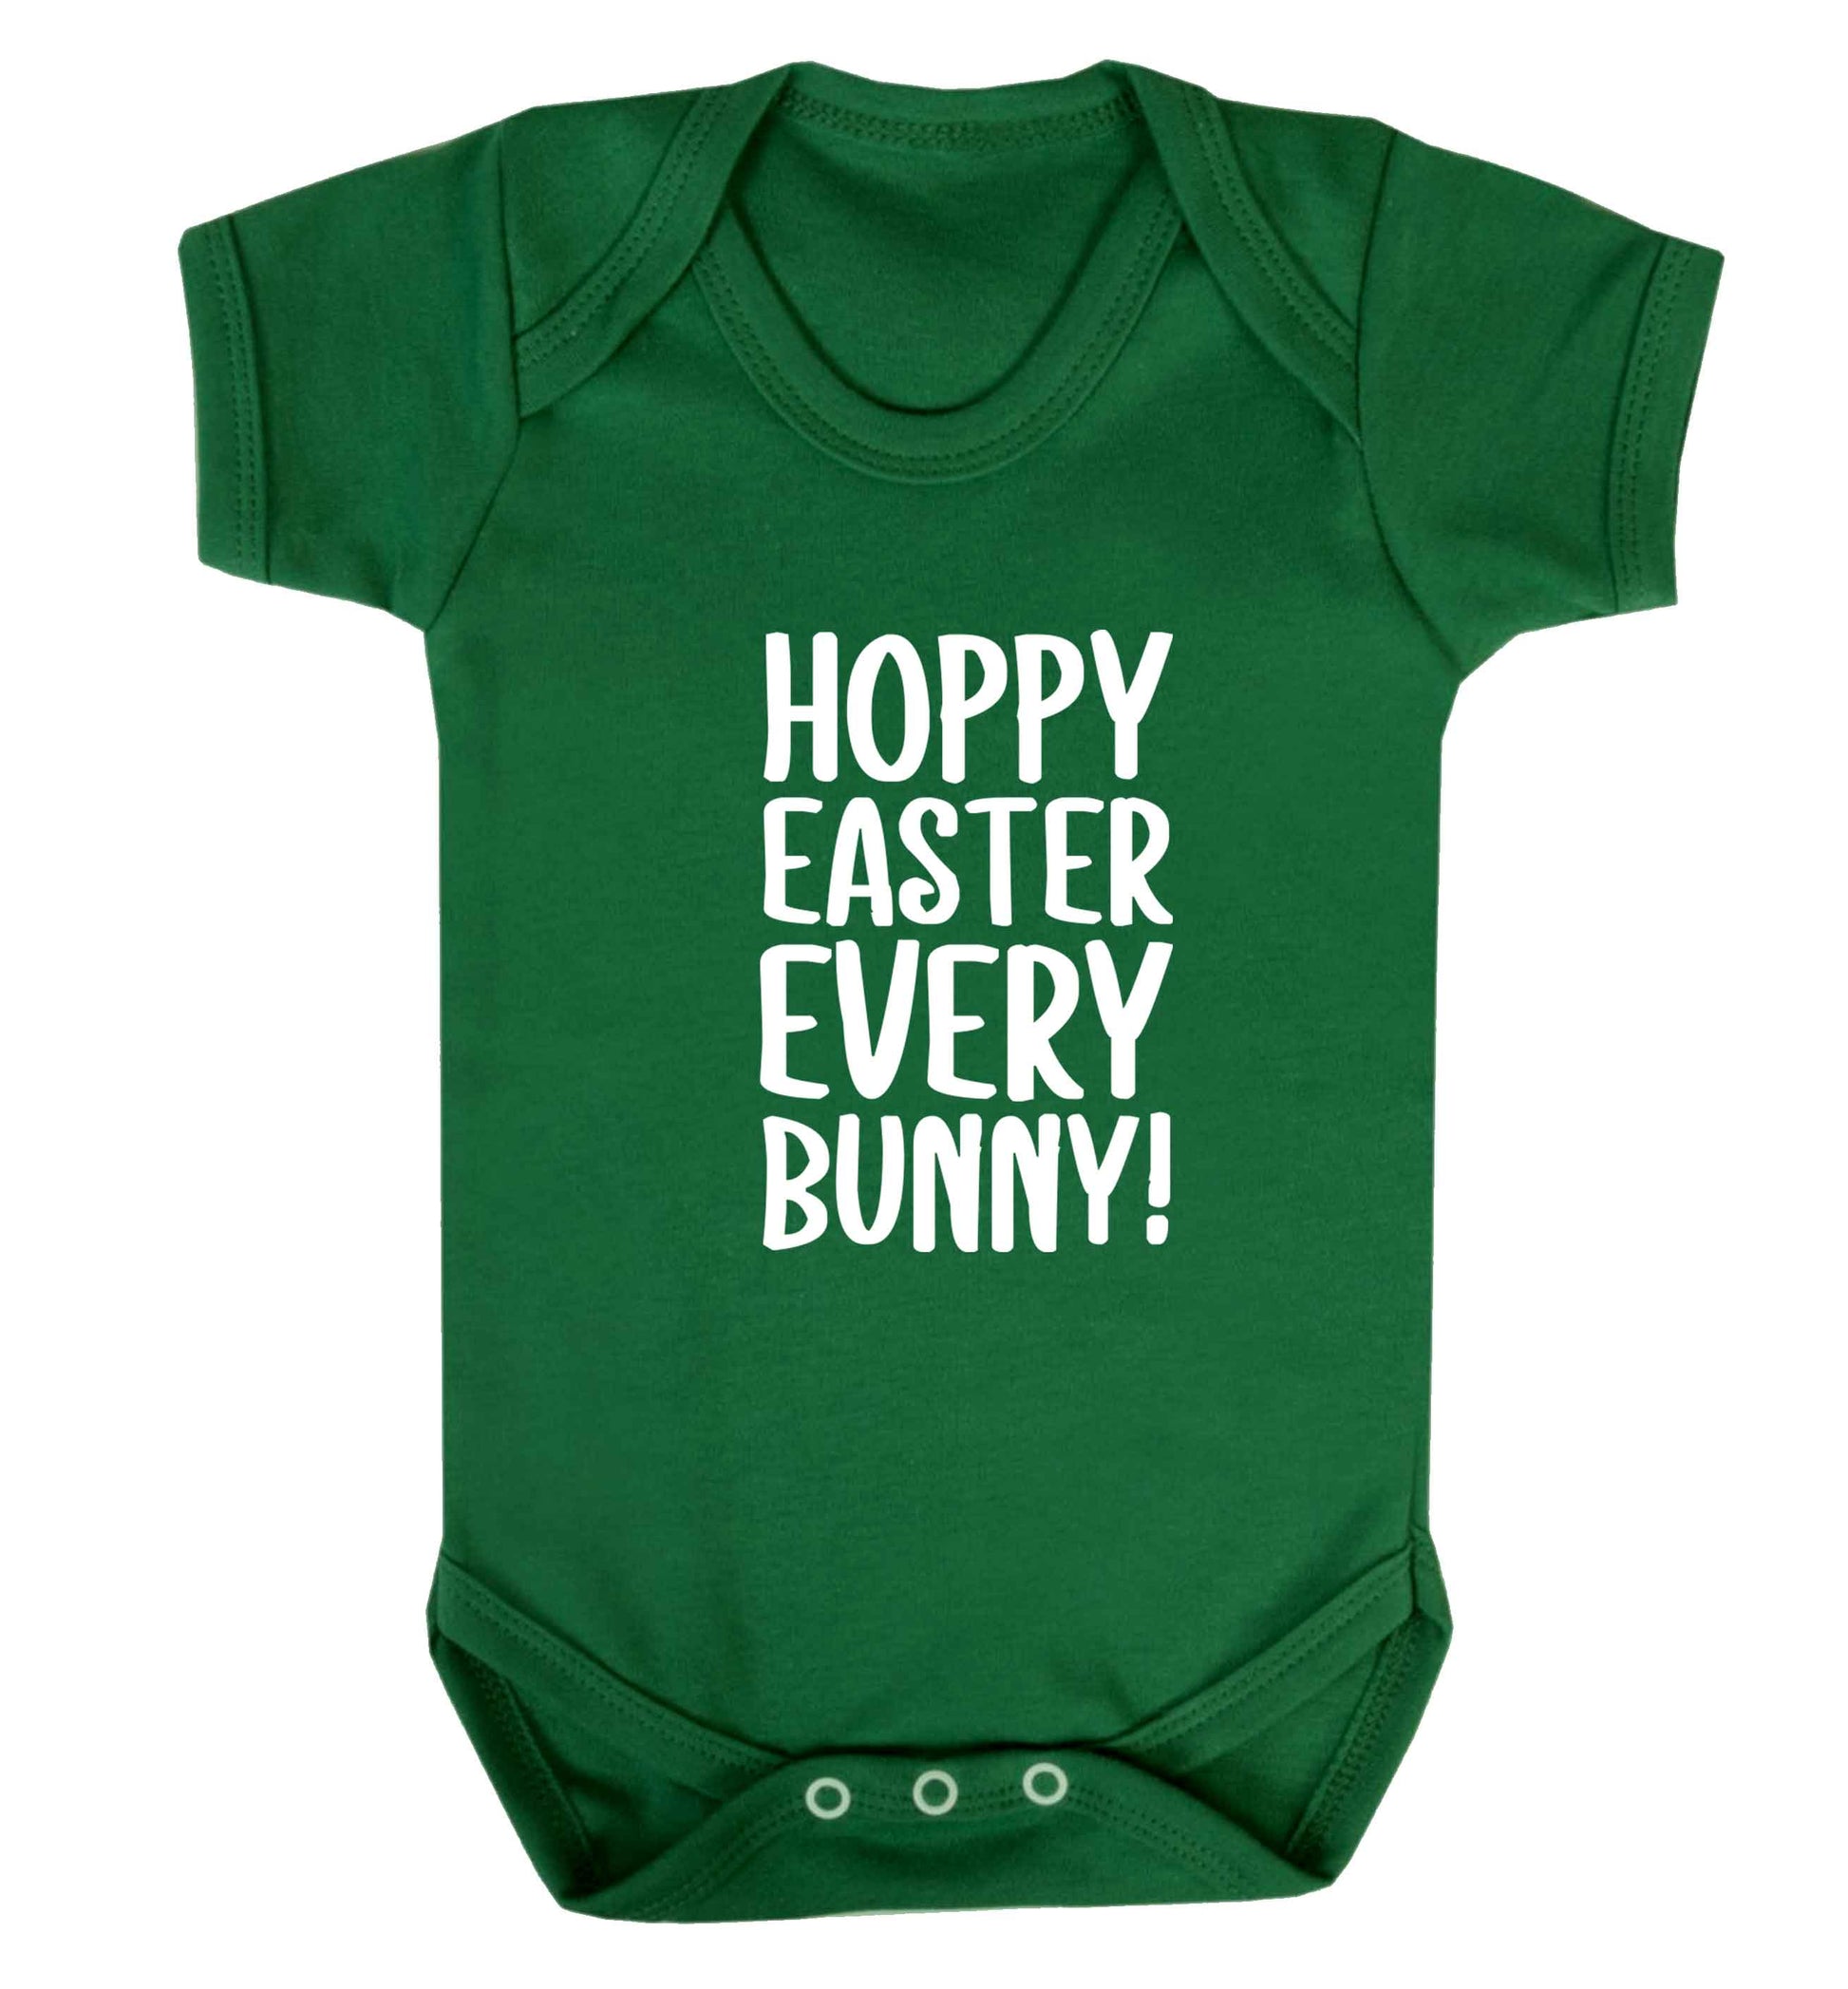 Hoppy Easter every bunny! baby vest green 18-24 months